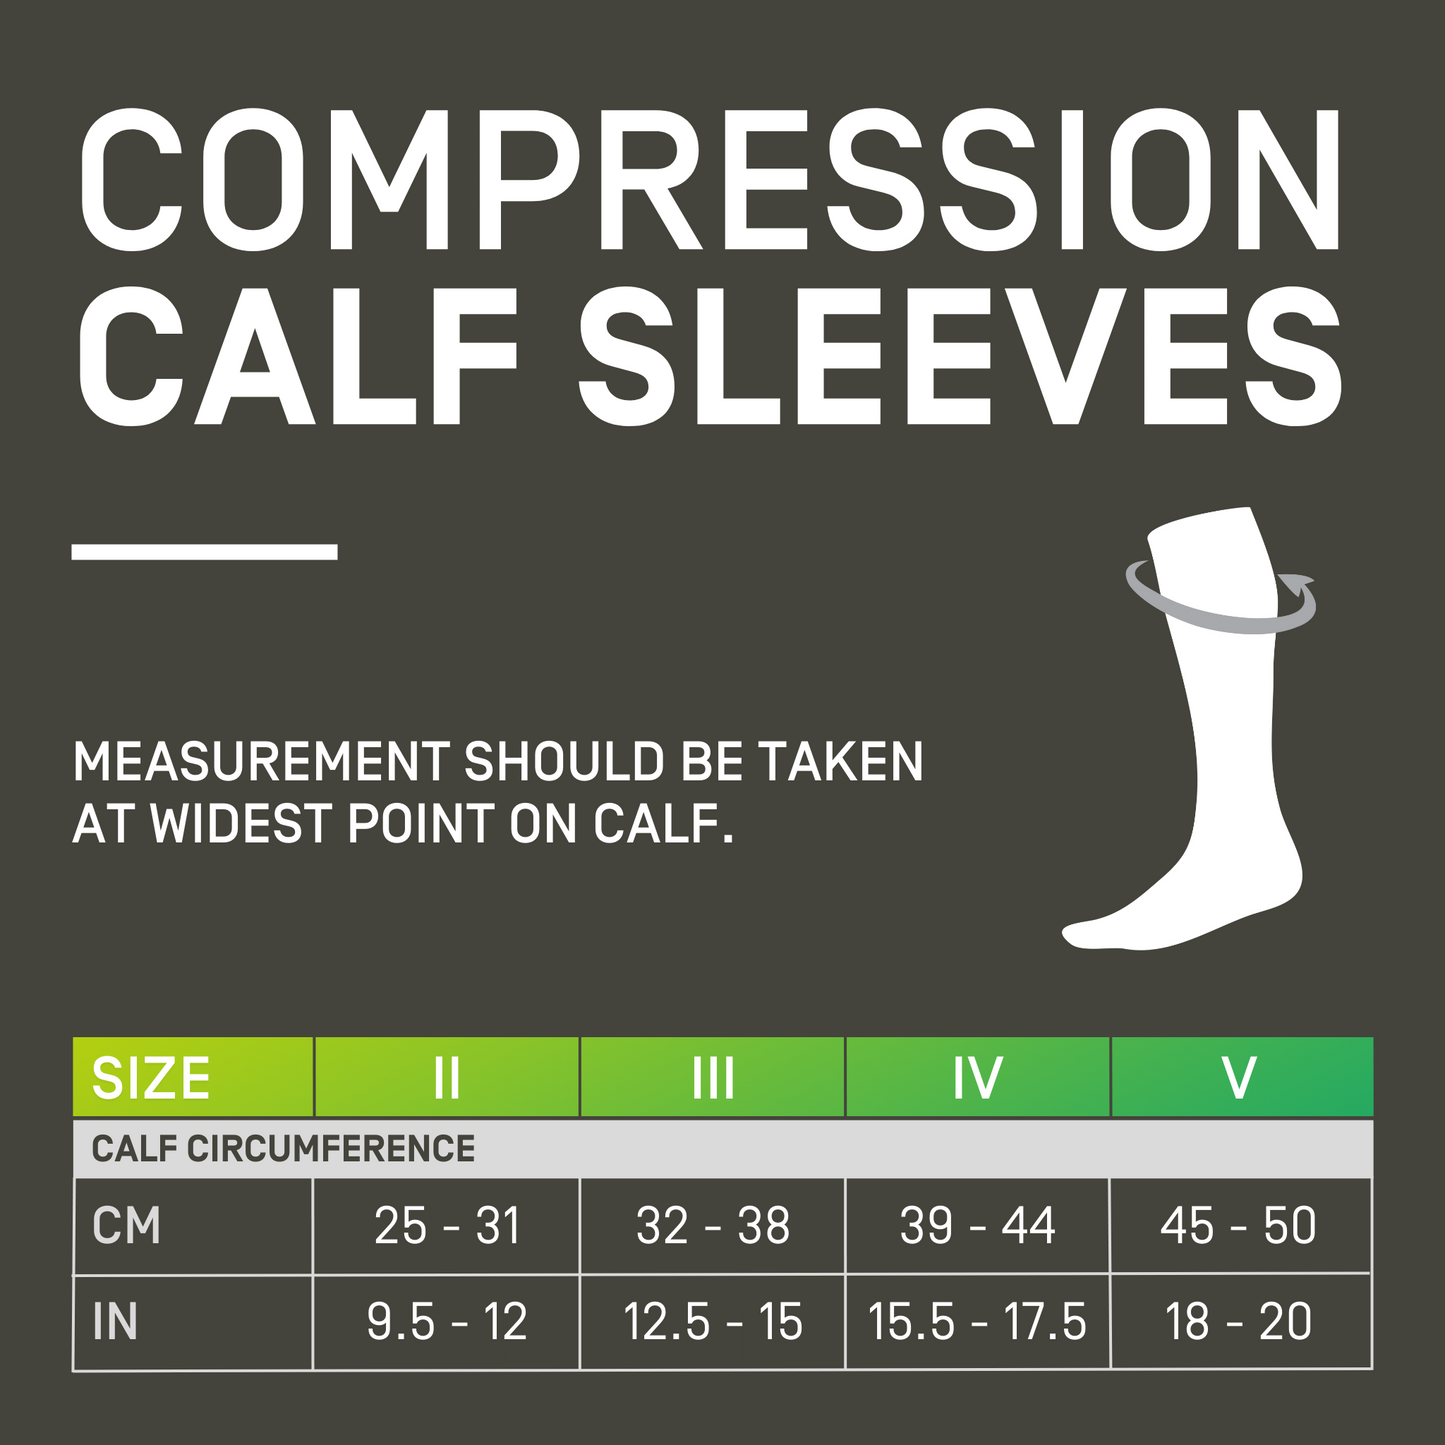 Reflective Compression Calf Sleeves, Women